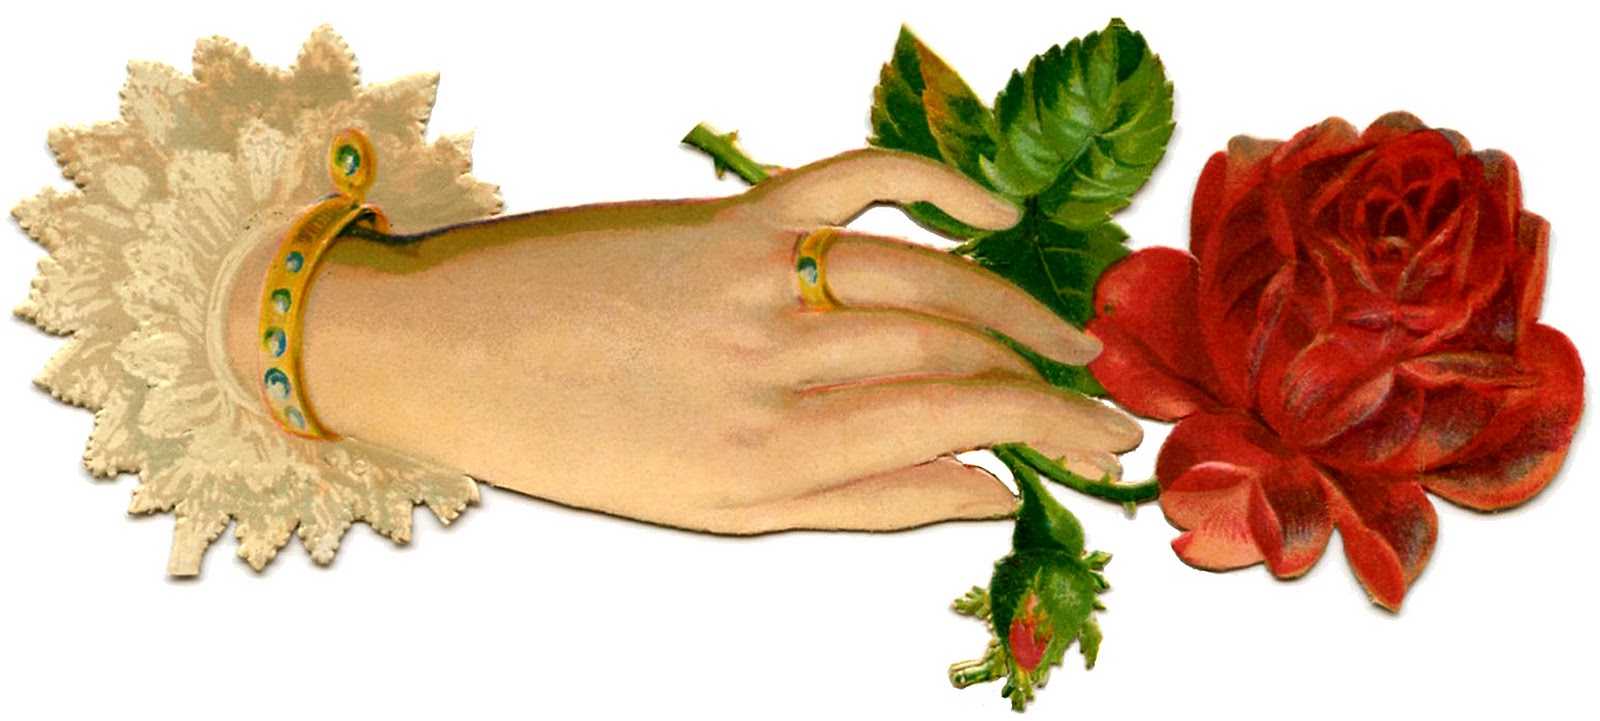 Victorian Graphic   Ladies Hand With Red Rose   The Graphics Fairy